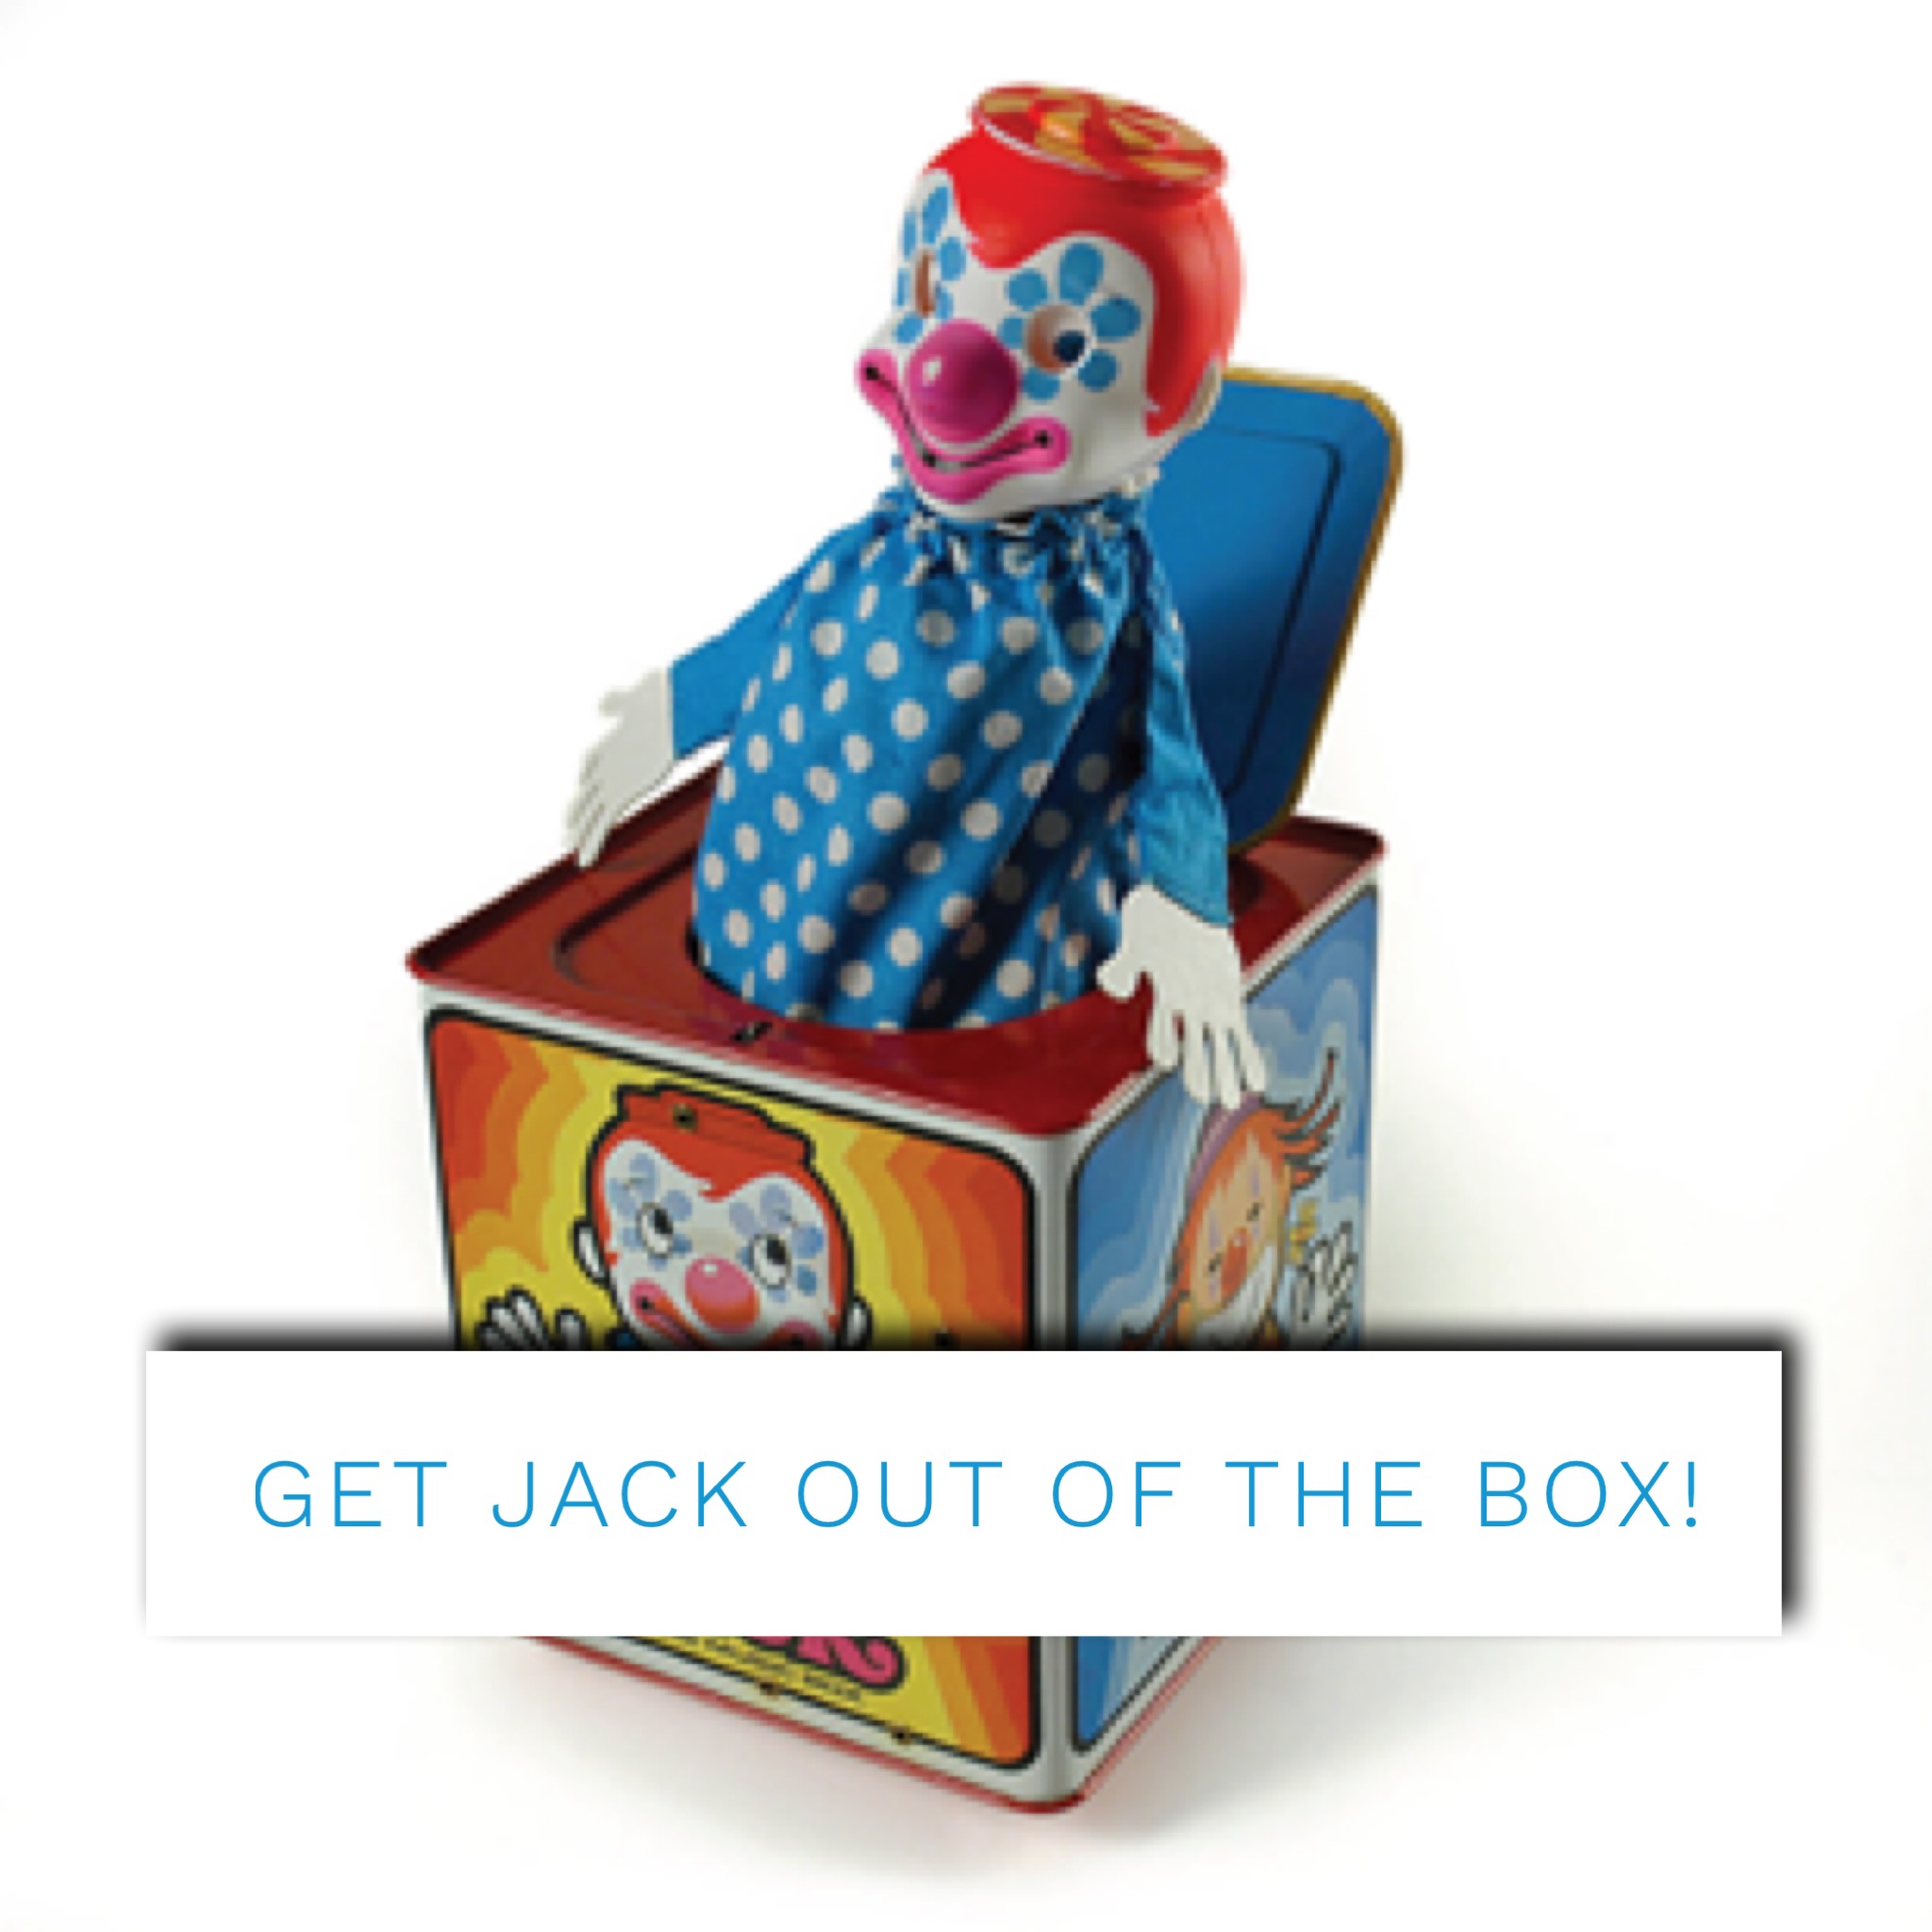 Get Jack out of the Box!